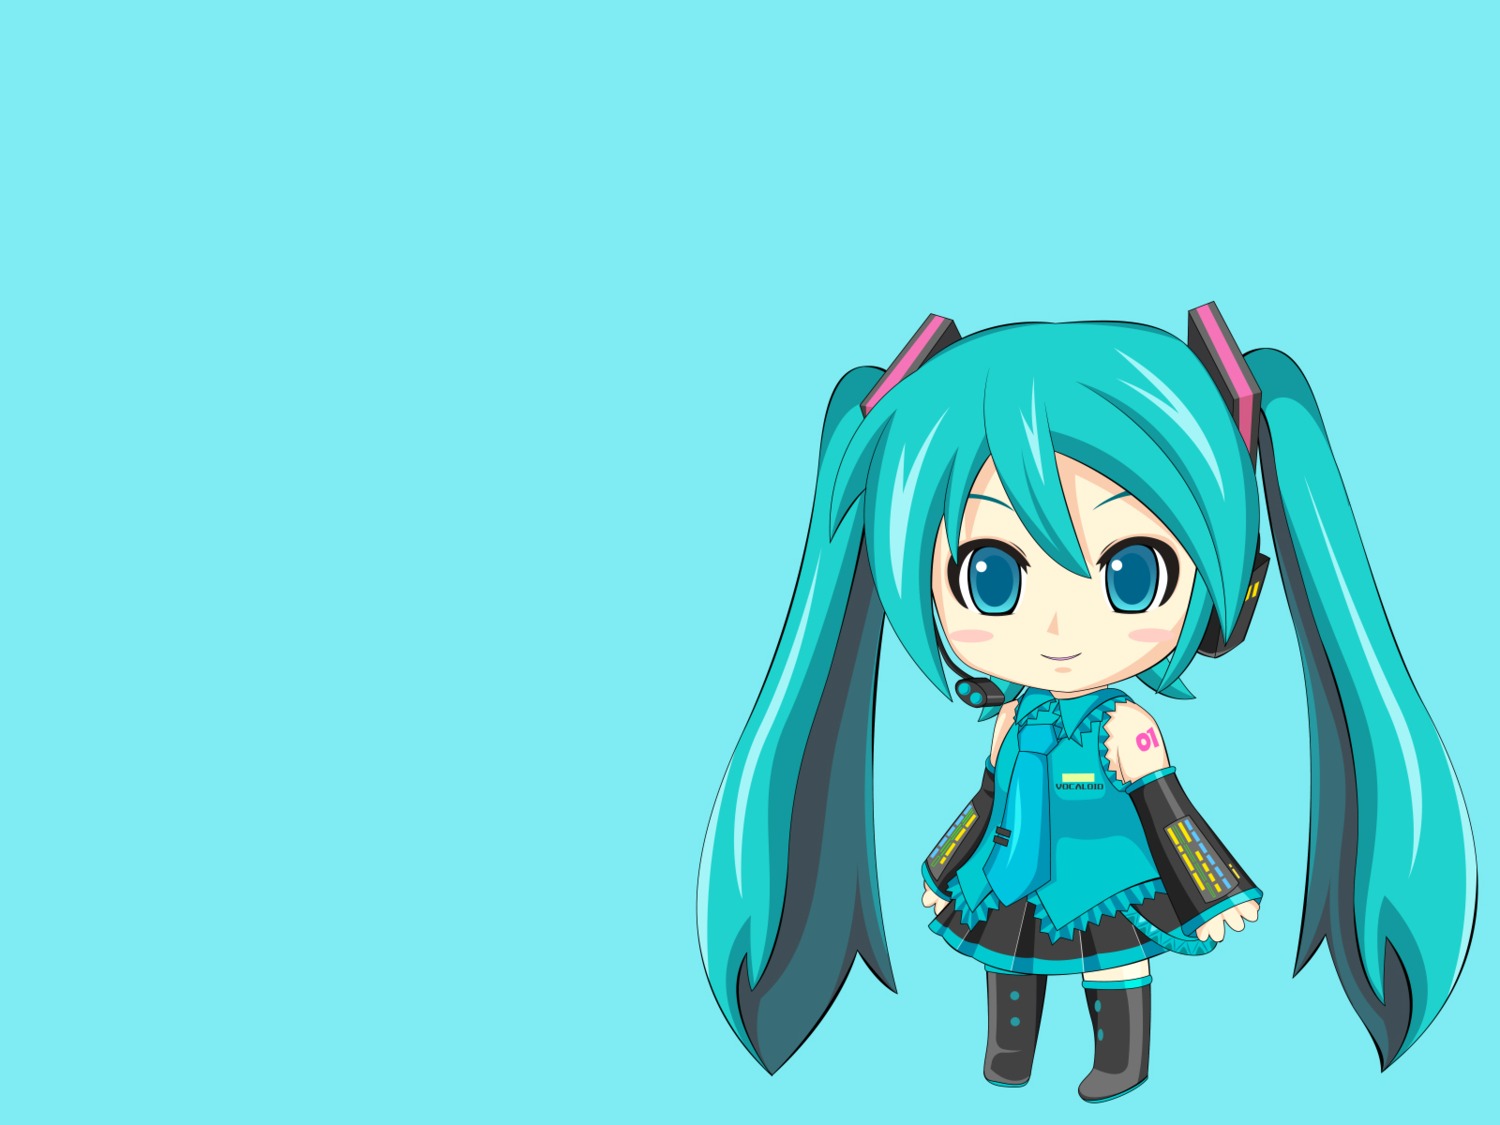 Vocaloid Chibi Wallpapers